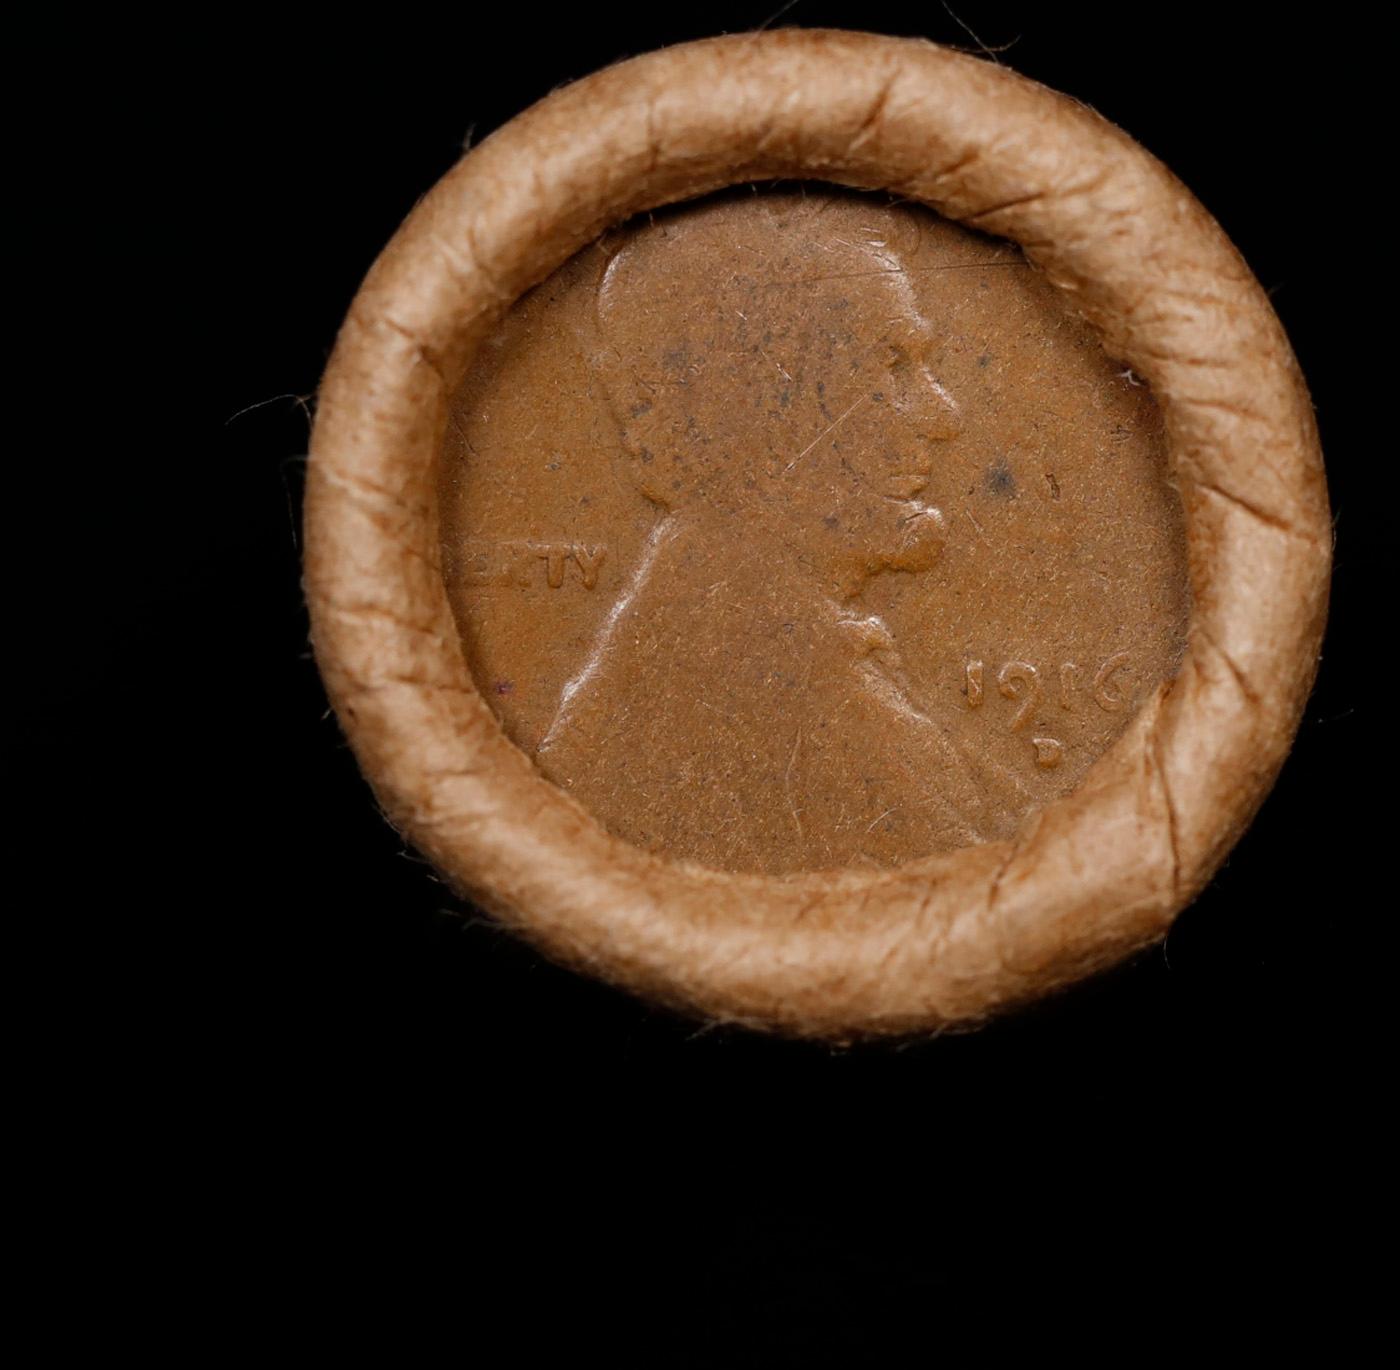 Small Cent Mixed Roll Orig Brandt McDonalds Wrapper, 1916-d Lincoln Wheat end, 1901 Indian other end